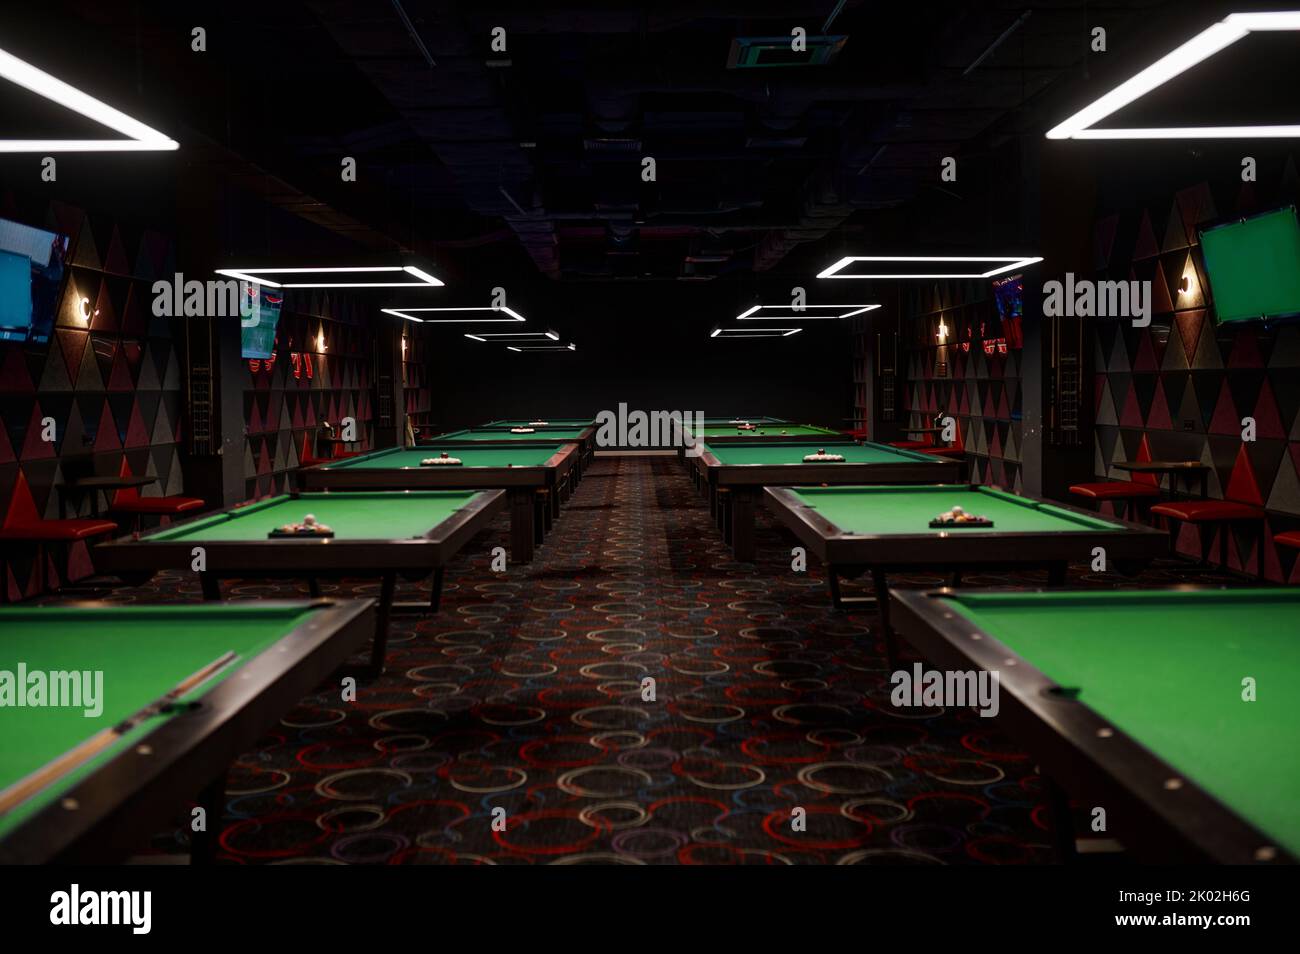 Interior of billiard club with pool table for game Stock Photo